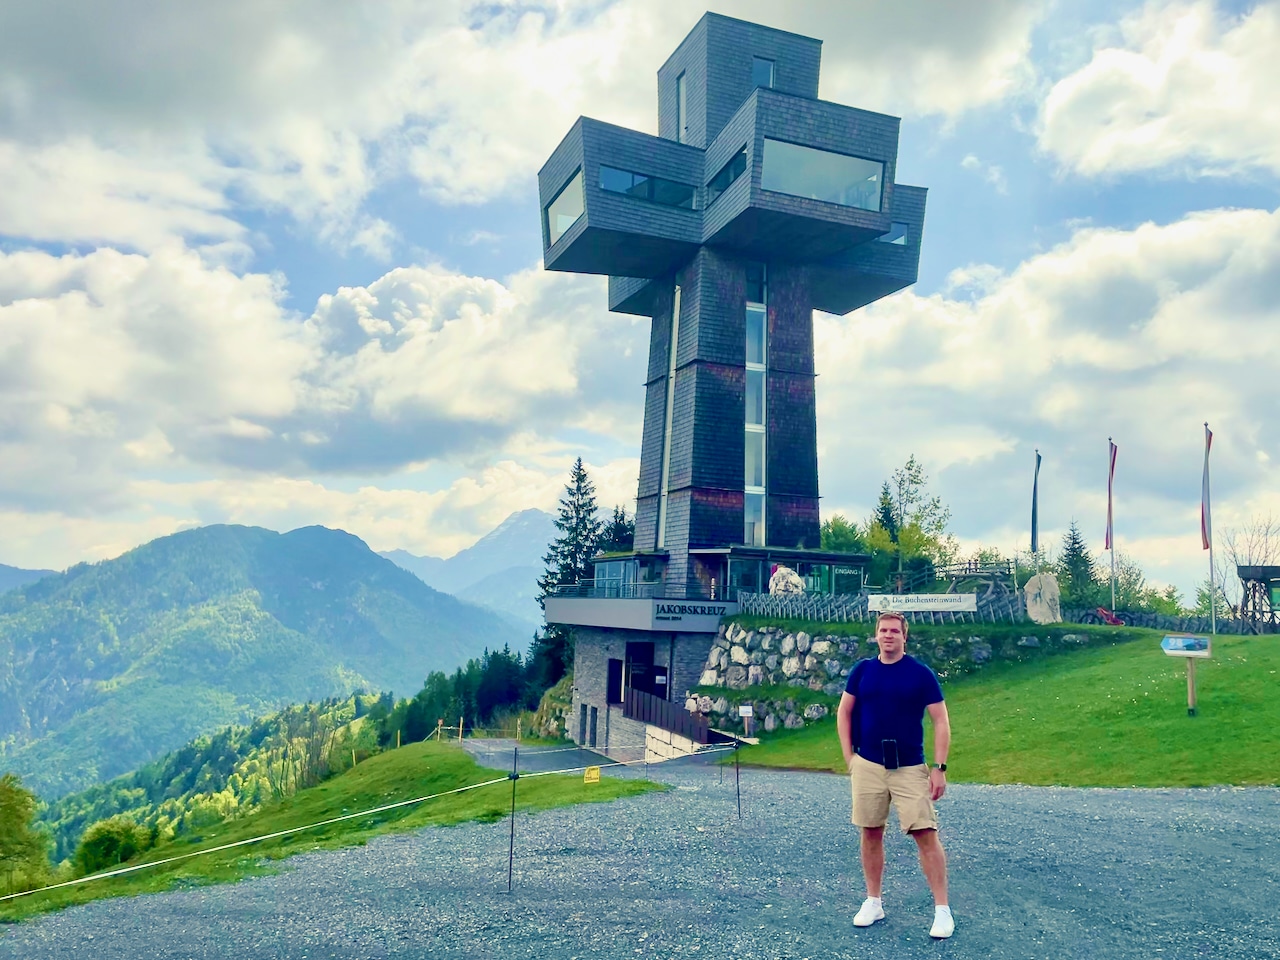 The Jakobskreuz is not only a lookout tower, but also a place of encounter, reflection and education. Travel Report Fieberbrunn Pillerseetal experiences tips sights activities